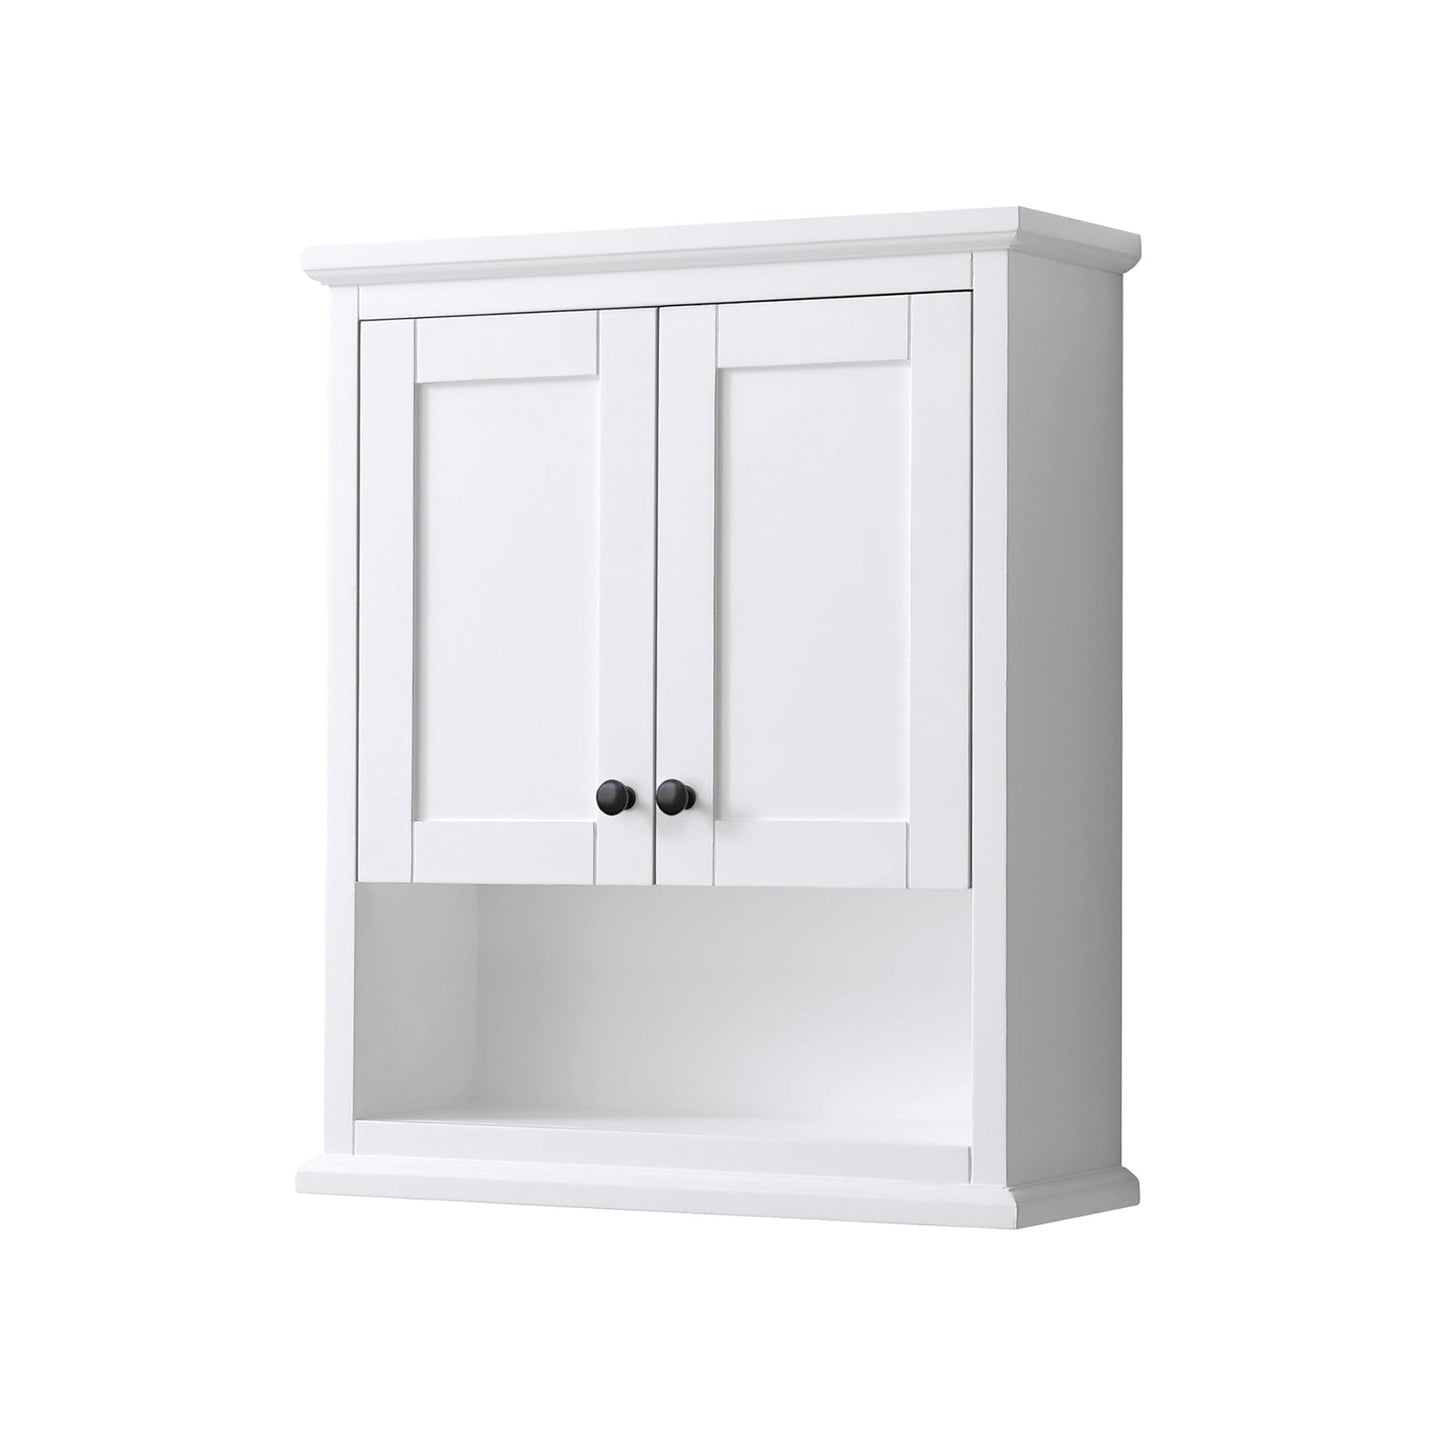 Avery 25" Over-the-Toilet Bathroom Wall-Mounted Storage Cabinet in White With Matte Black Trim